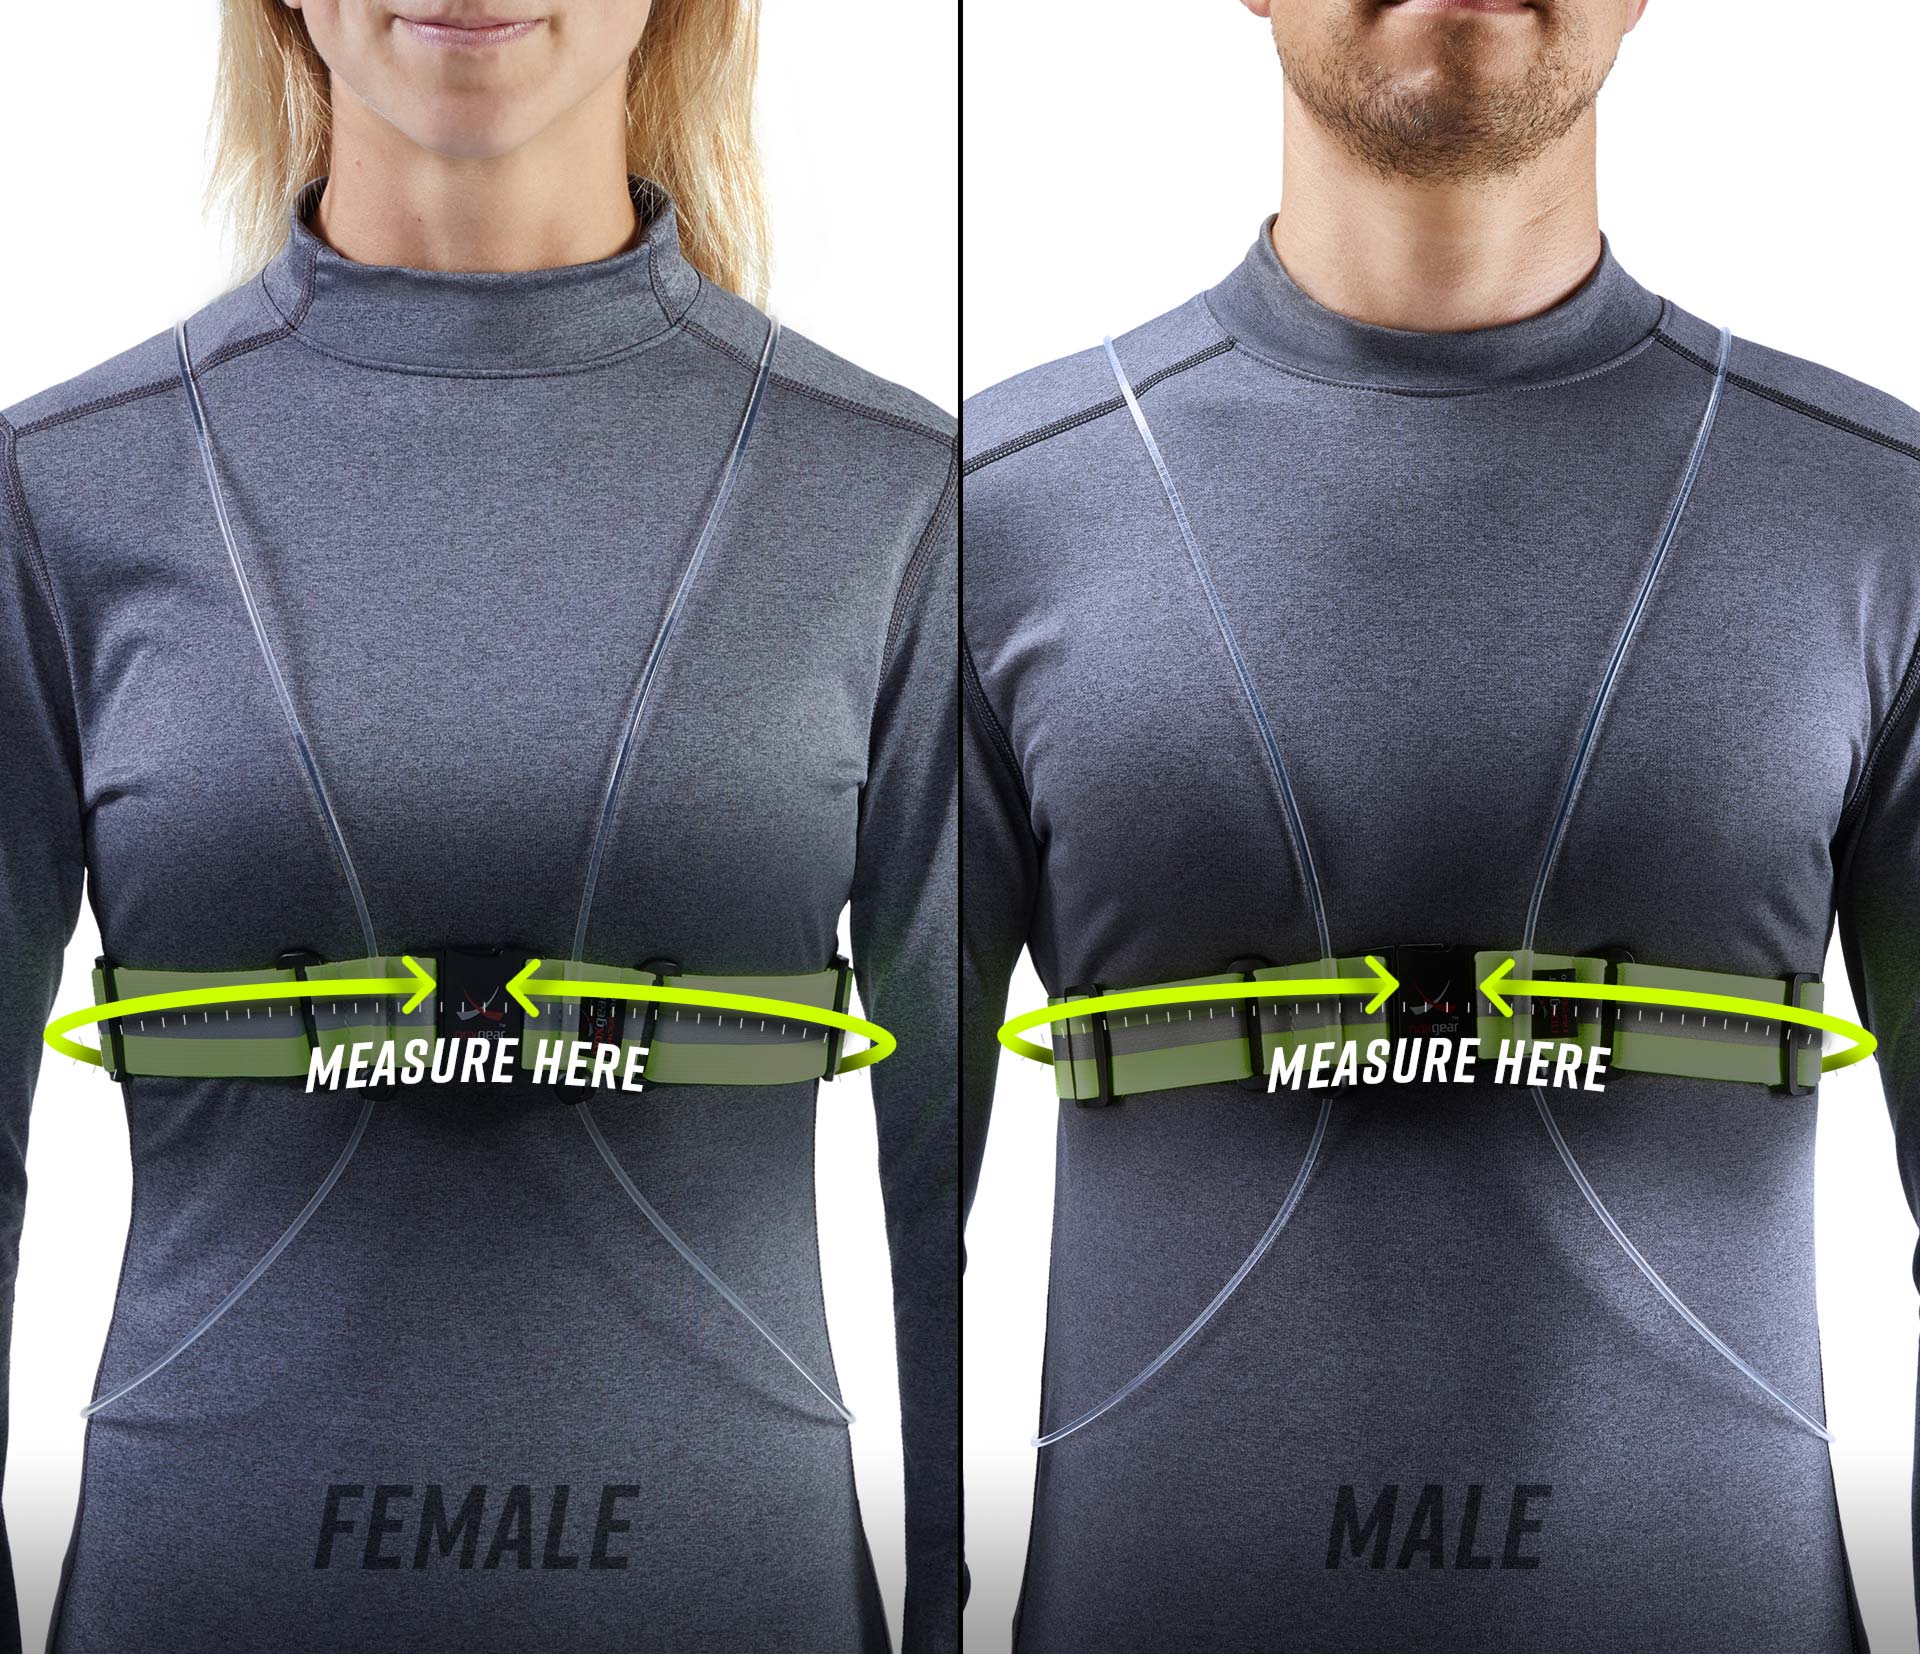 Photo showing the fit of a Tracer360 on the torso of a man and a woman.